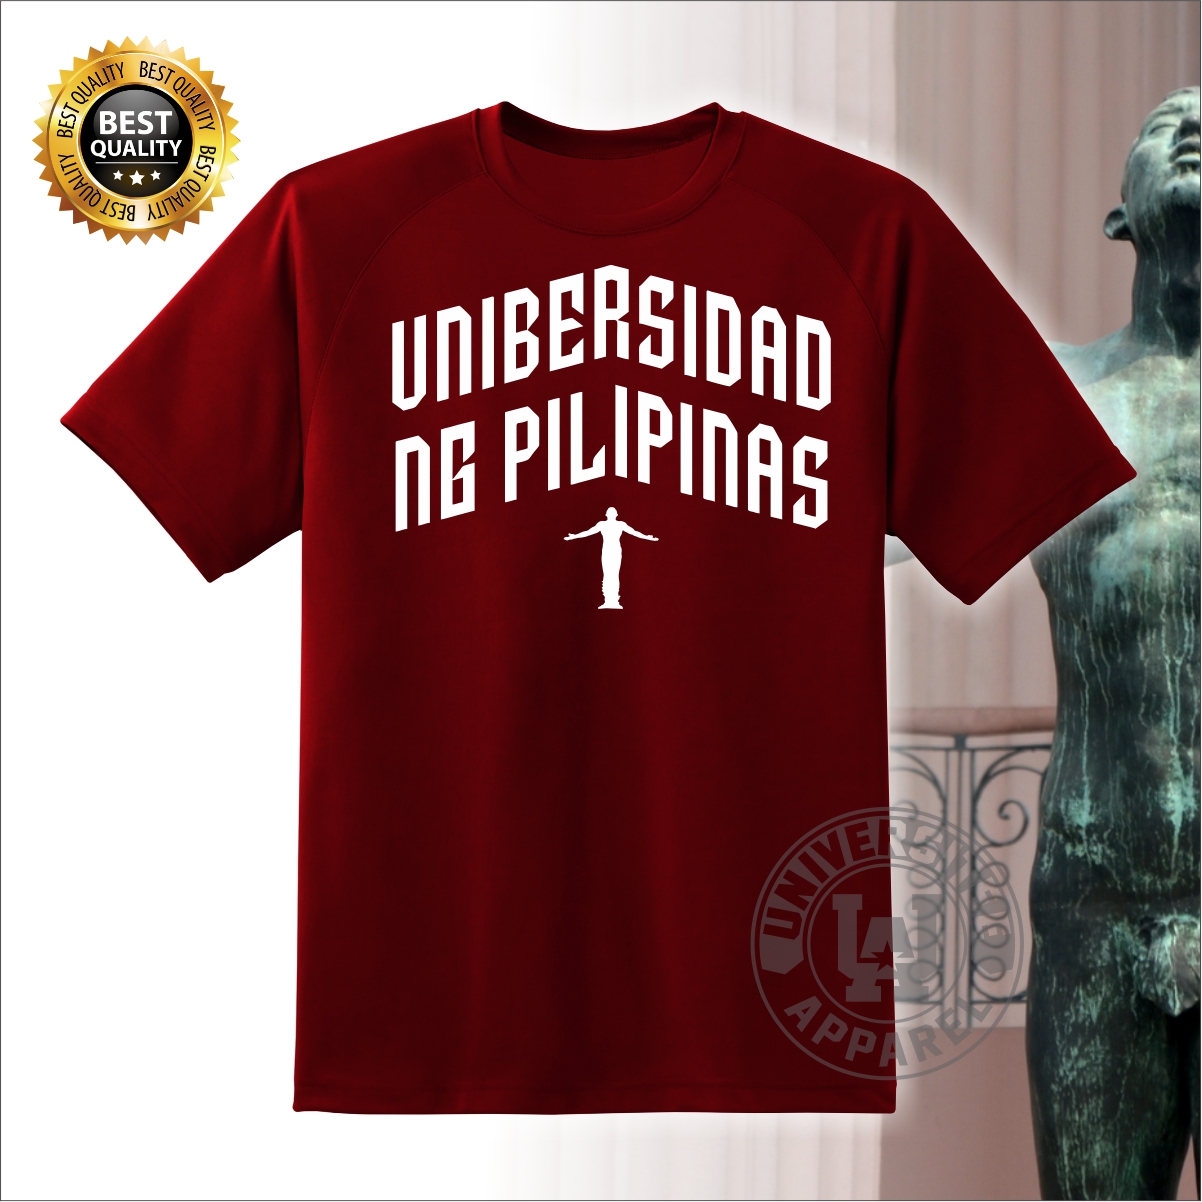 up fighting maroons jersey